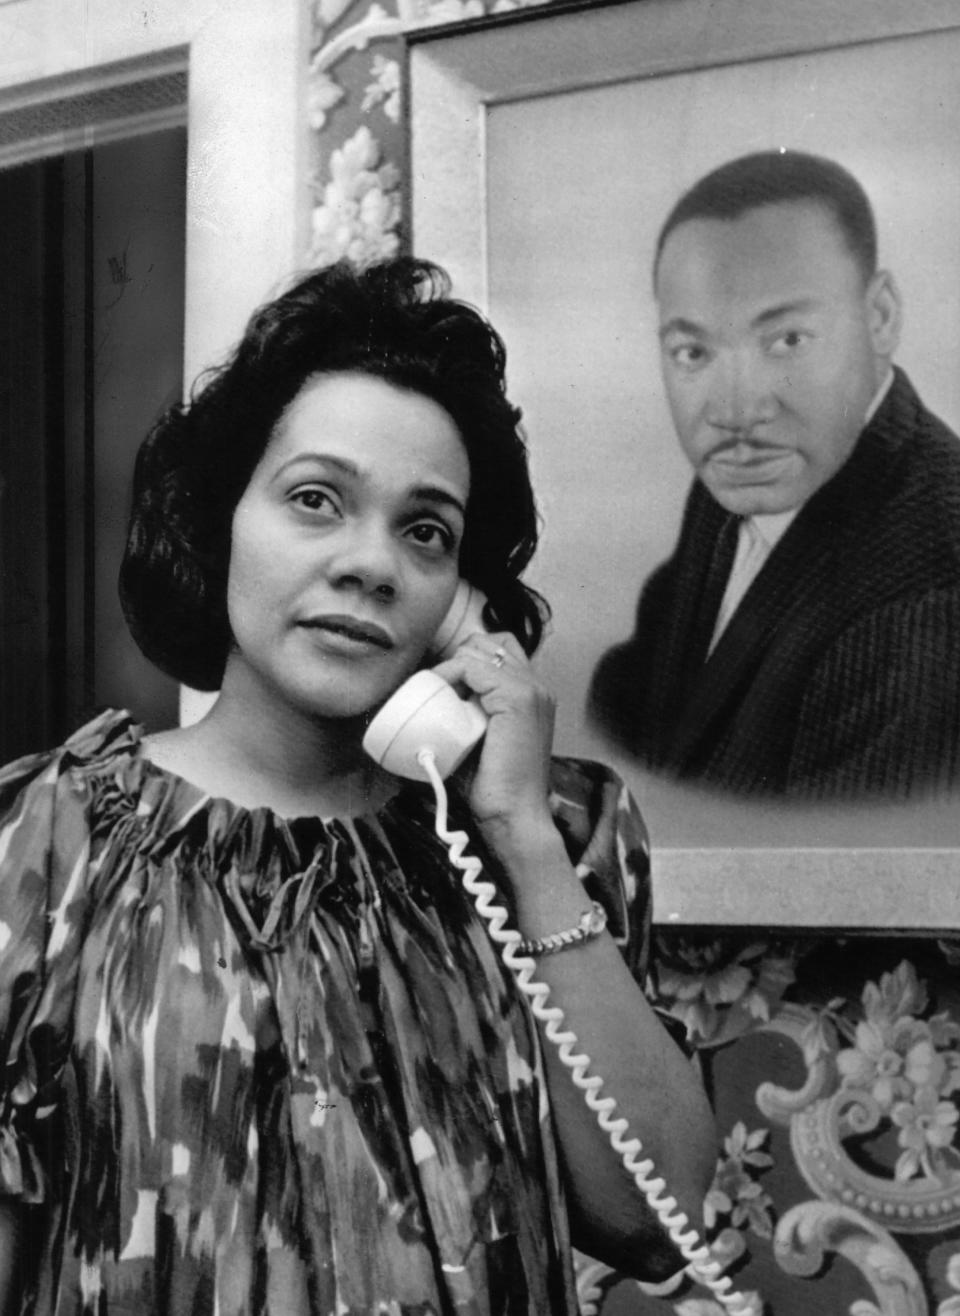 Coretta Scott King, wife of civil rights leader Dr. Martin Luther King Jr., speaks with President Kennedy by phone on April 15, 1963, regarding racial tensions in Birmingham, Ala., where her husband was in jail.